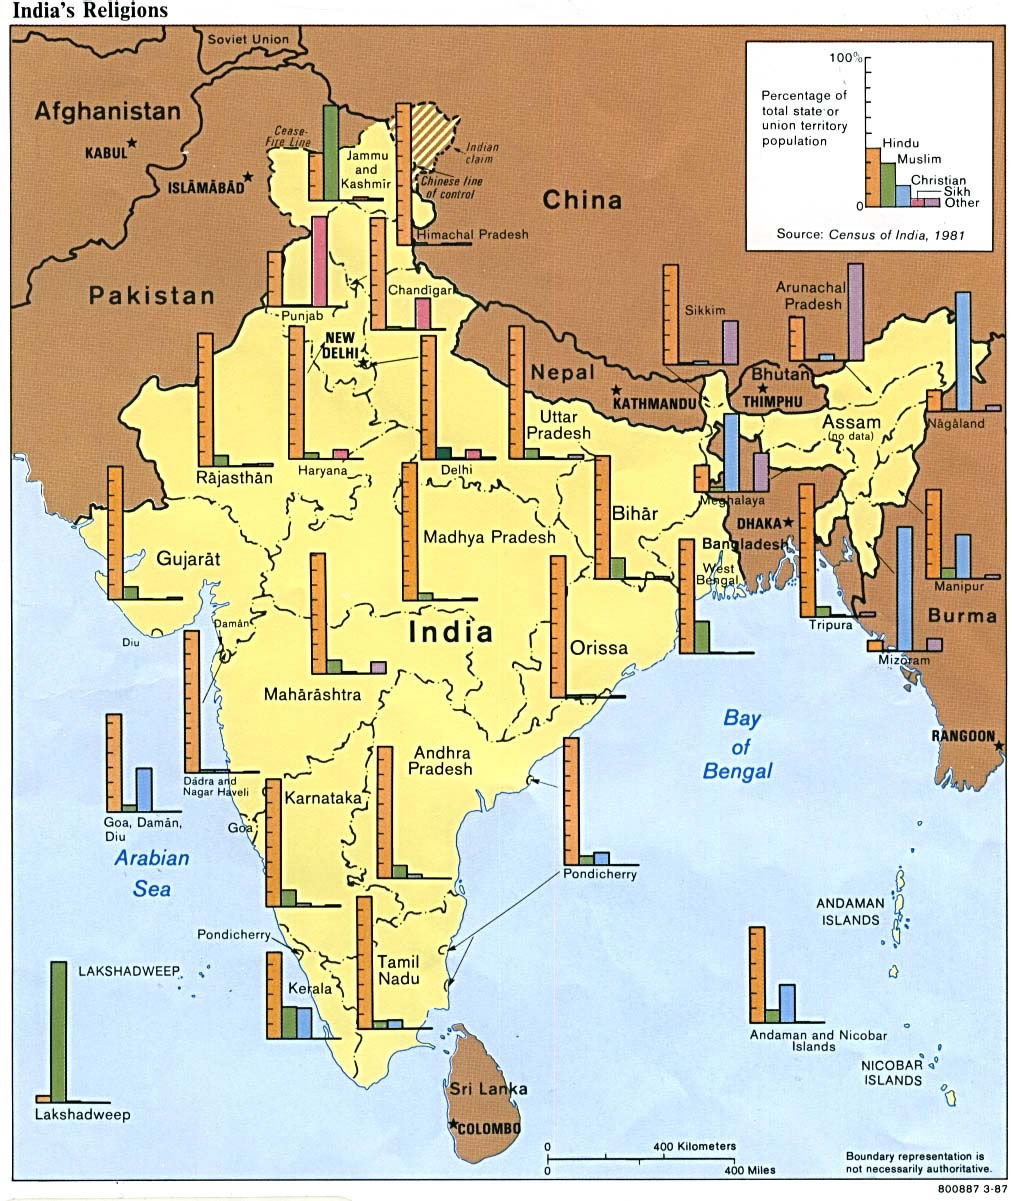 religions-map-of-india-1987